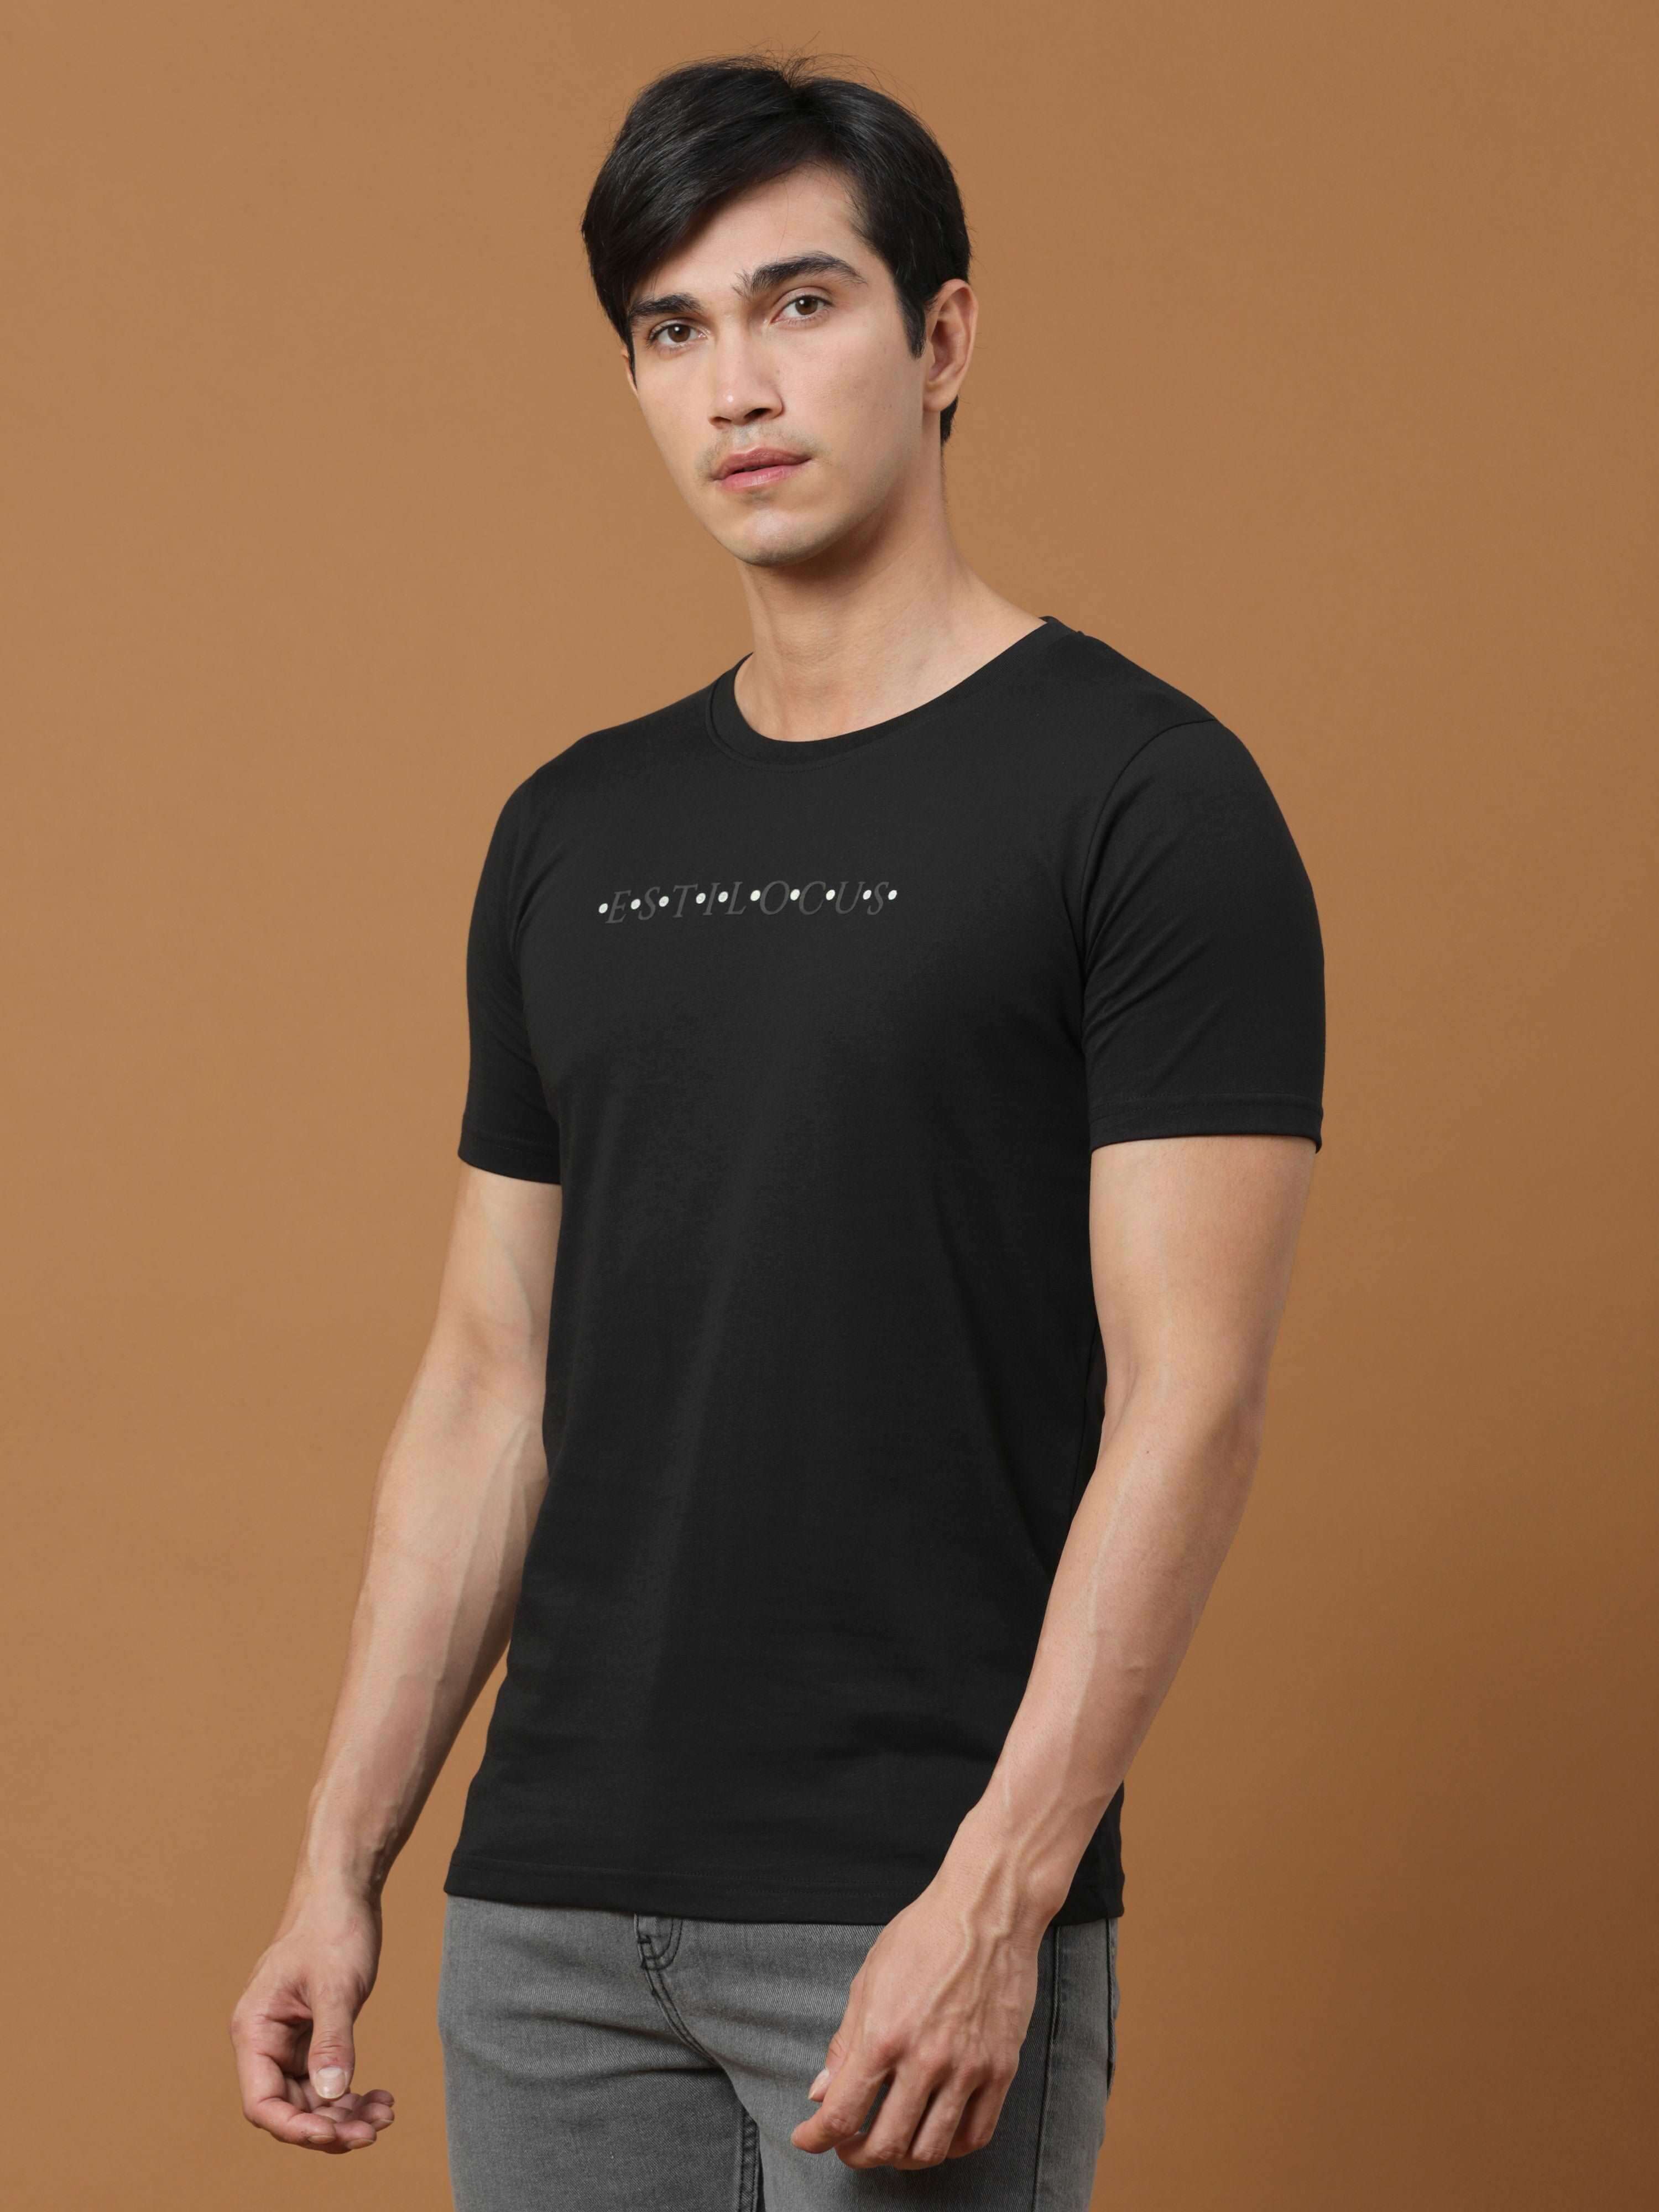 Black Luminescent Printed T Shirt shop online at Estilocus. 100% Cotton Designed and printed on knitted fabric. The fabric is stretchy and lightweight, with a soft skin feel and no wrinkles. Crew neck collar which is smooth on the neck and keeps you comfo